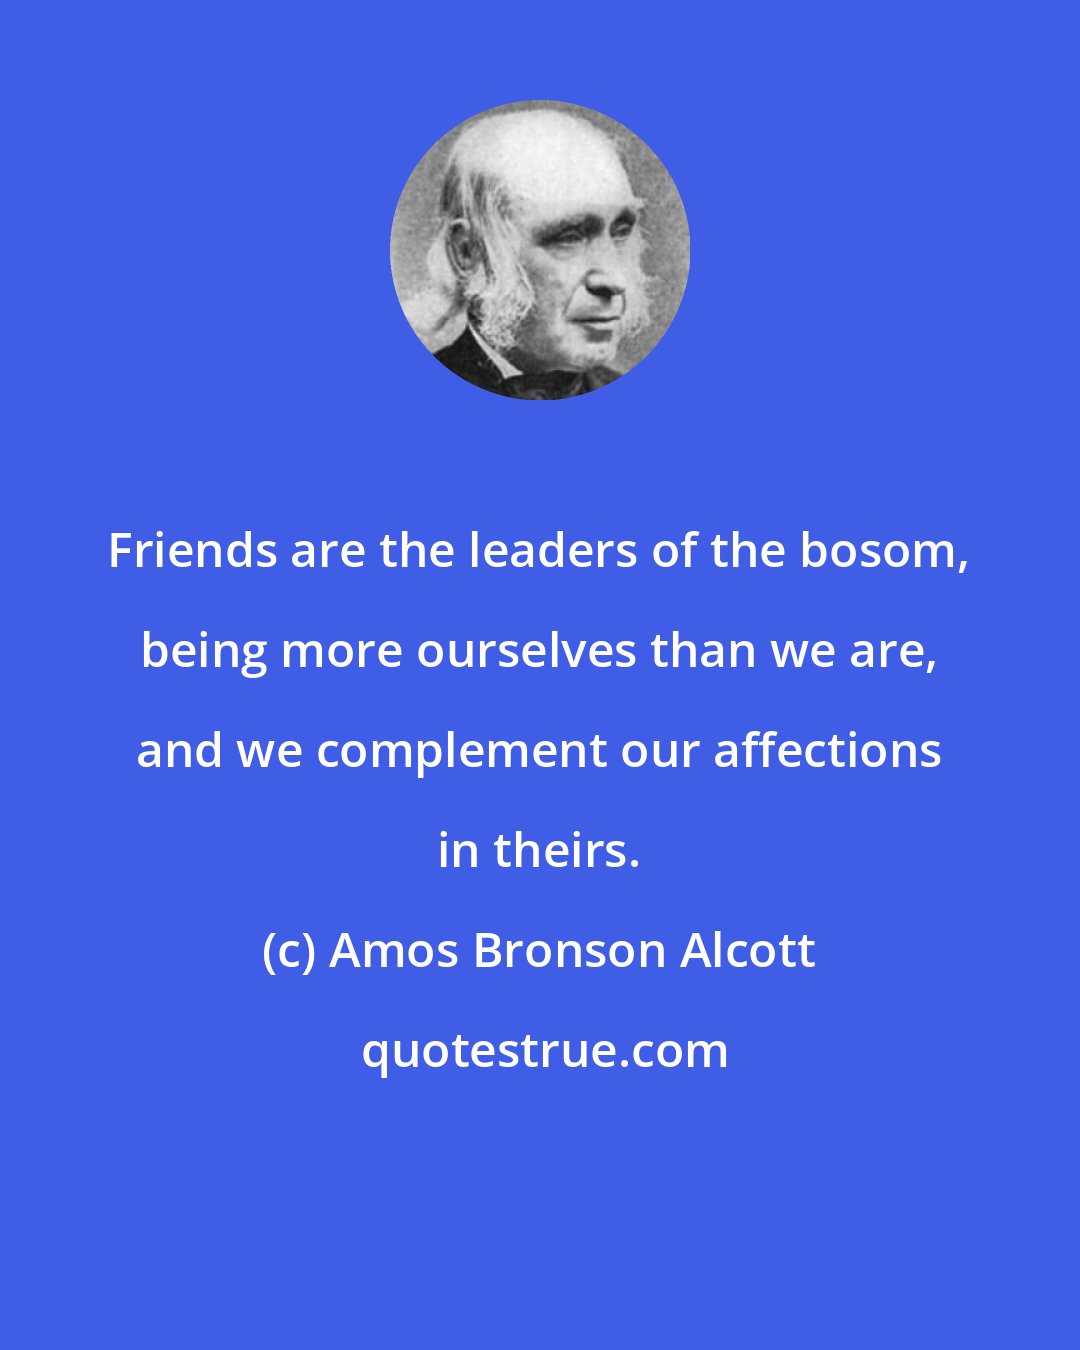 Amos Bronson Alcott: Friends are the leaders of the bosom, being more ourselves than we are, and we complement our affections in theirs.